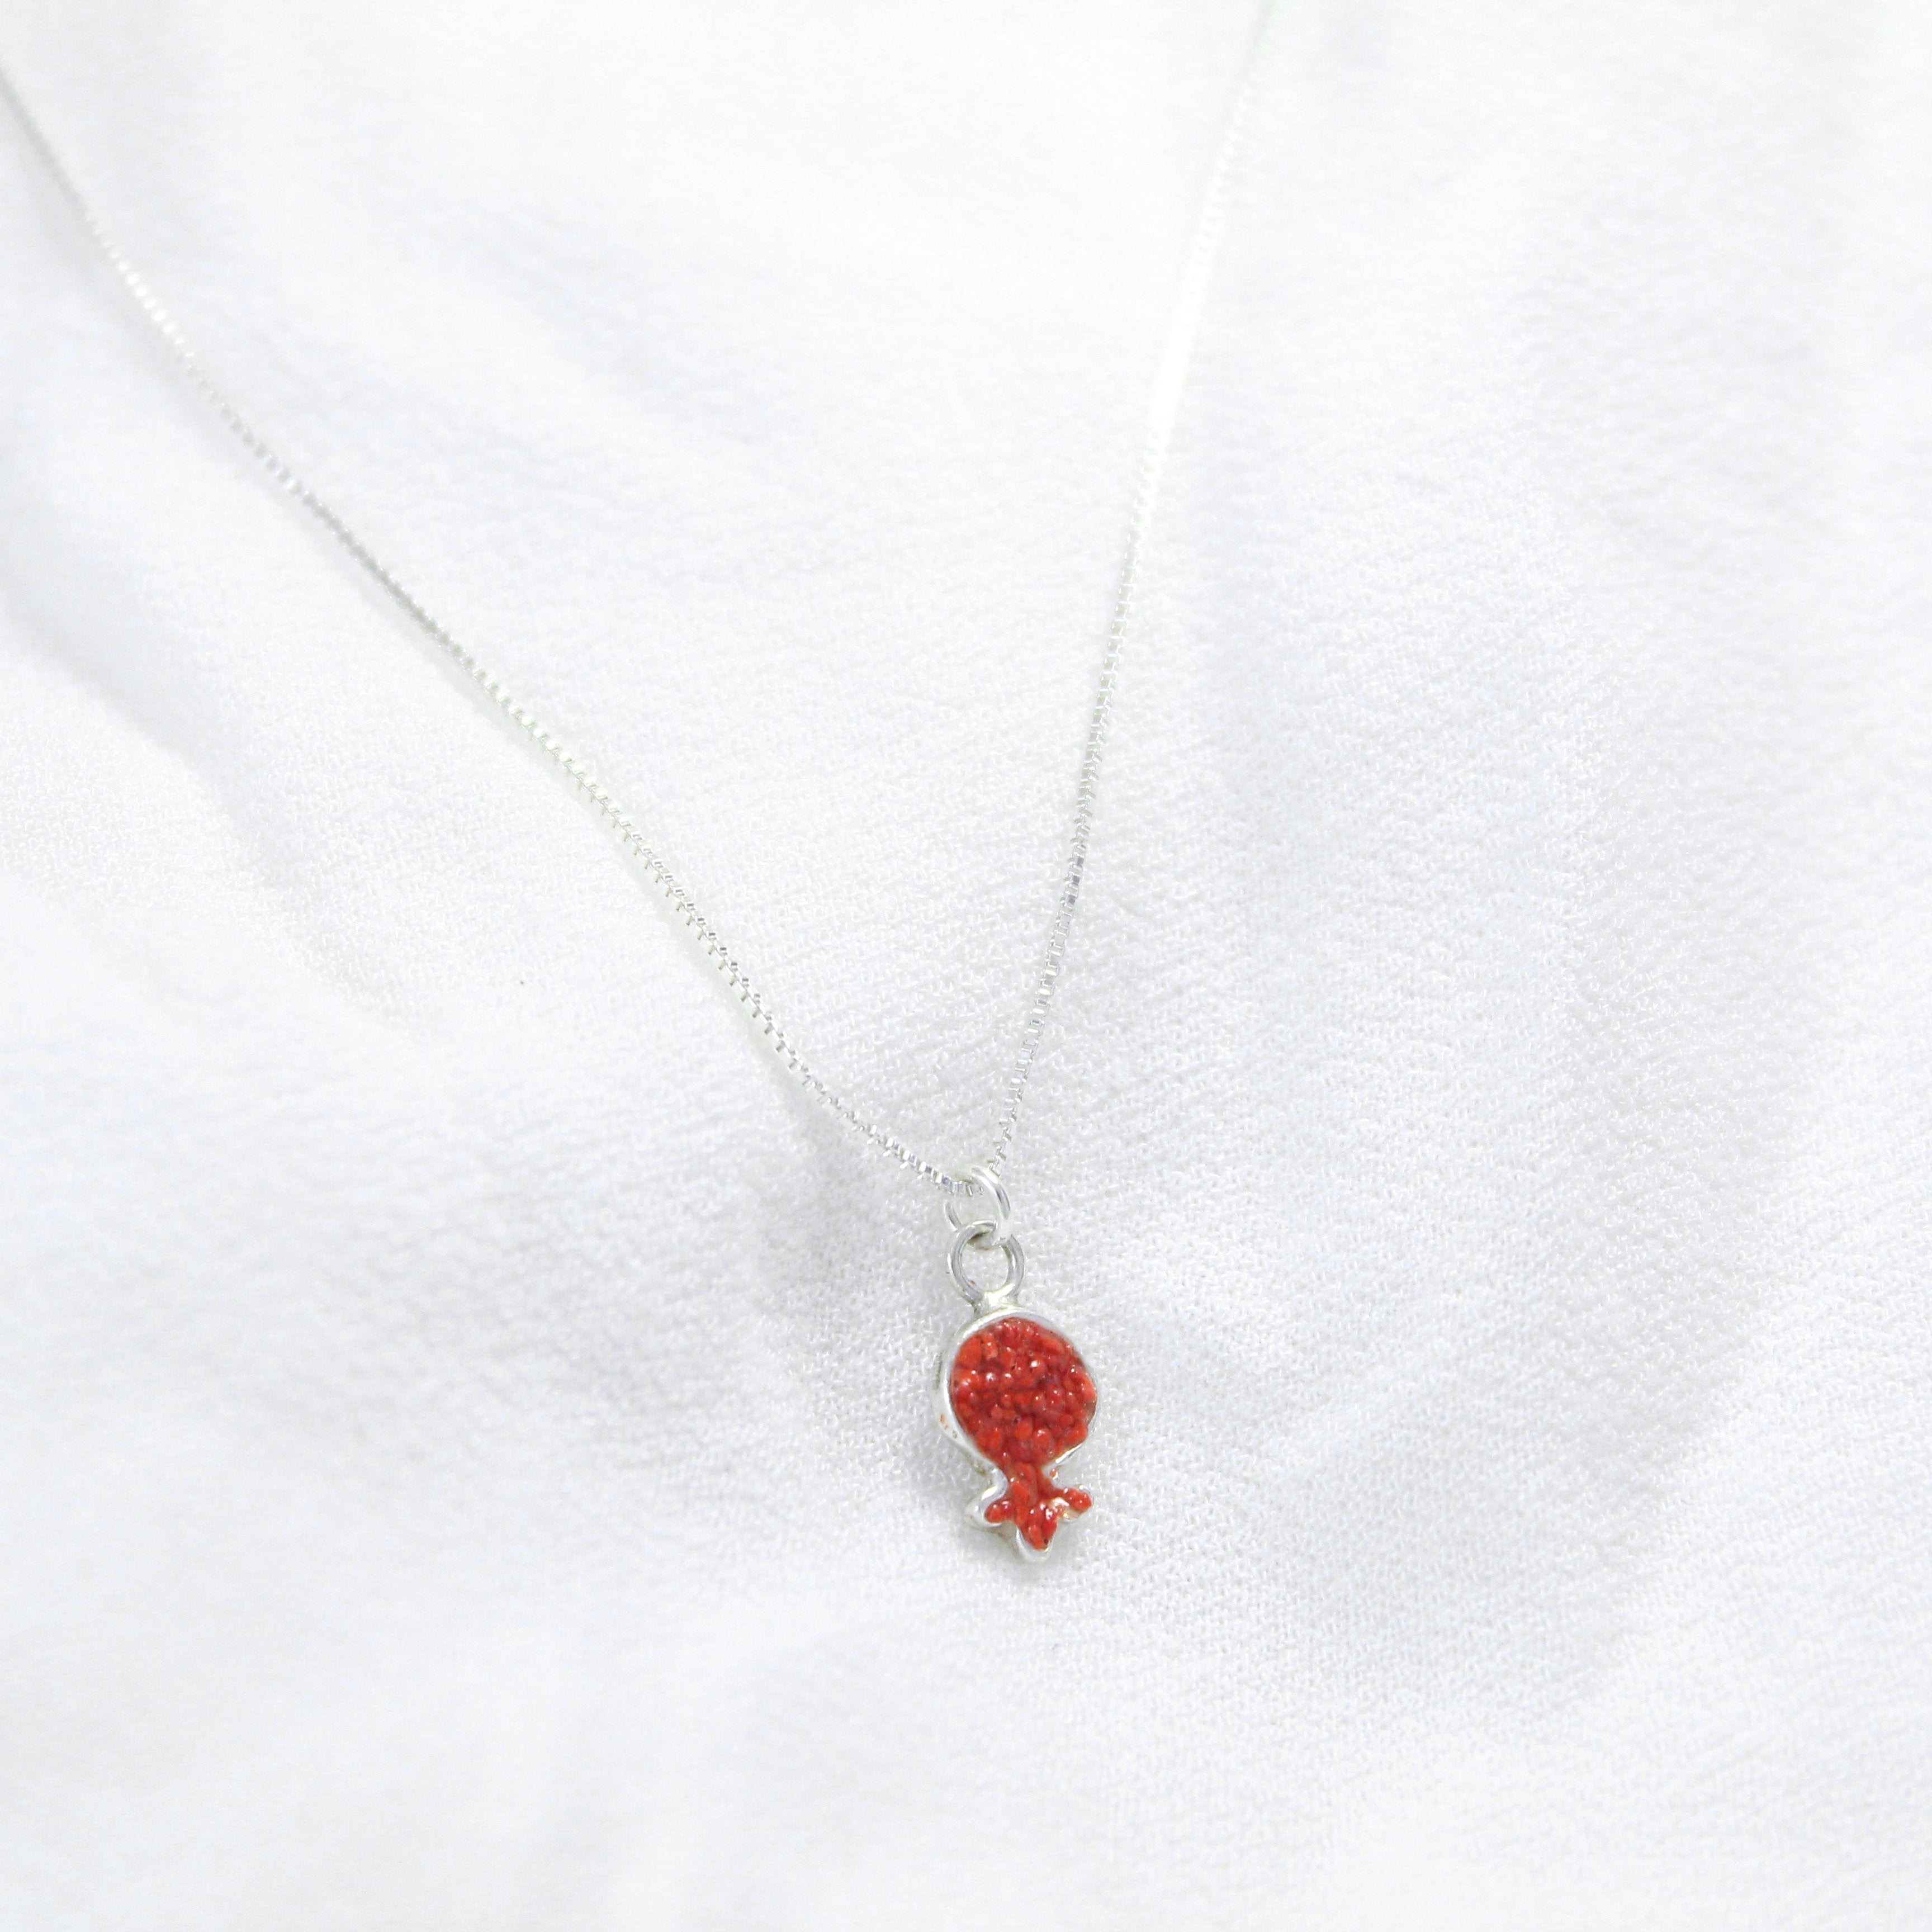 Small Red Pomegranate Necklace with stones - Shulamit Kanter